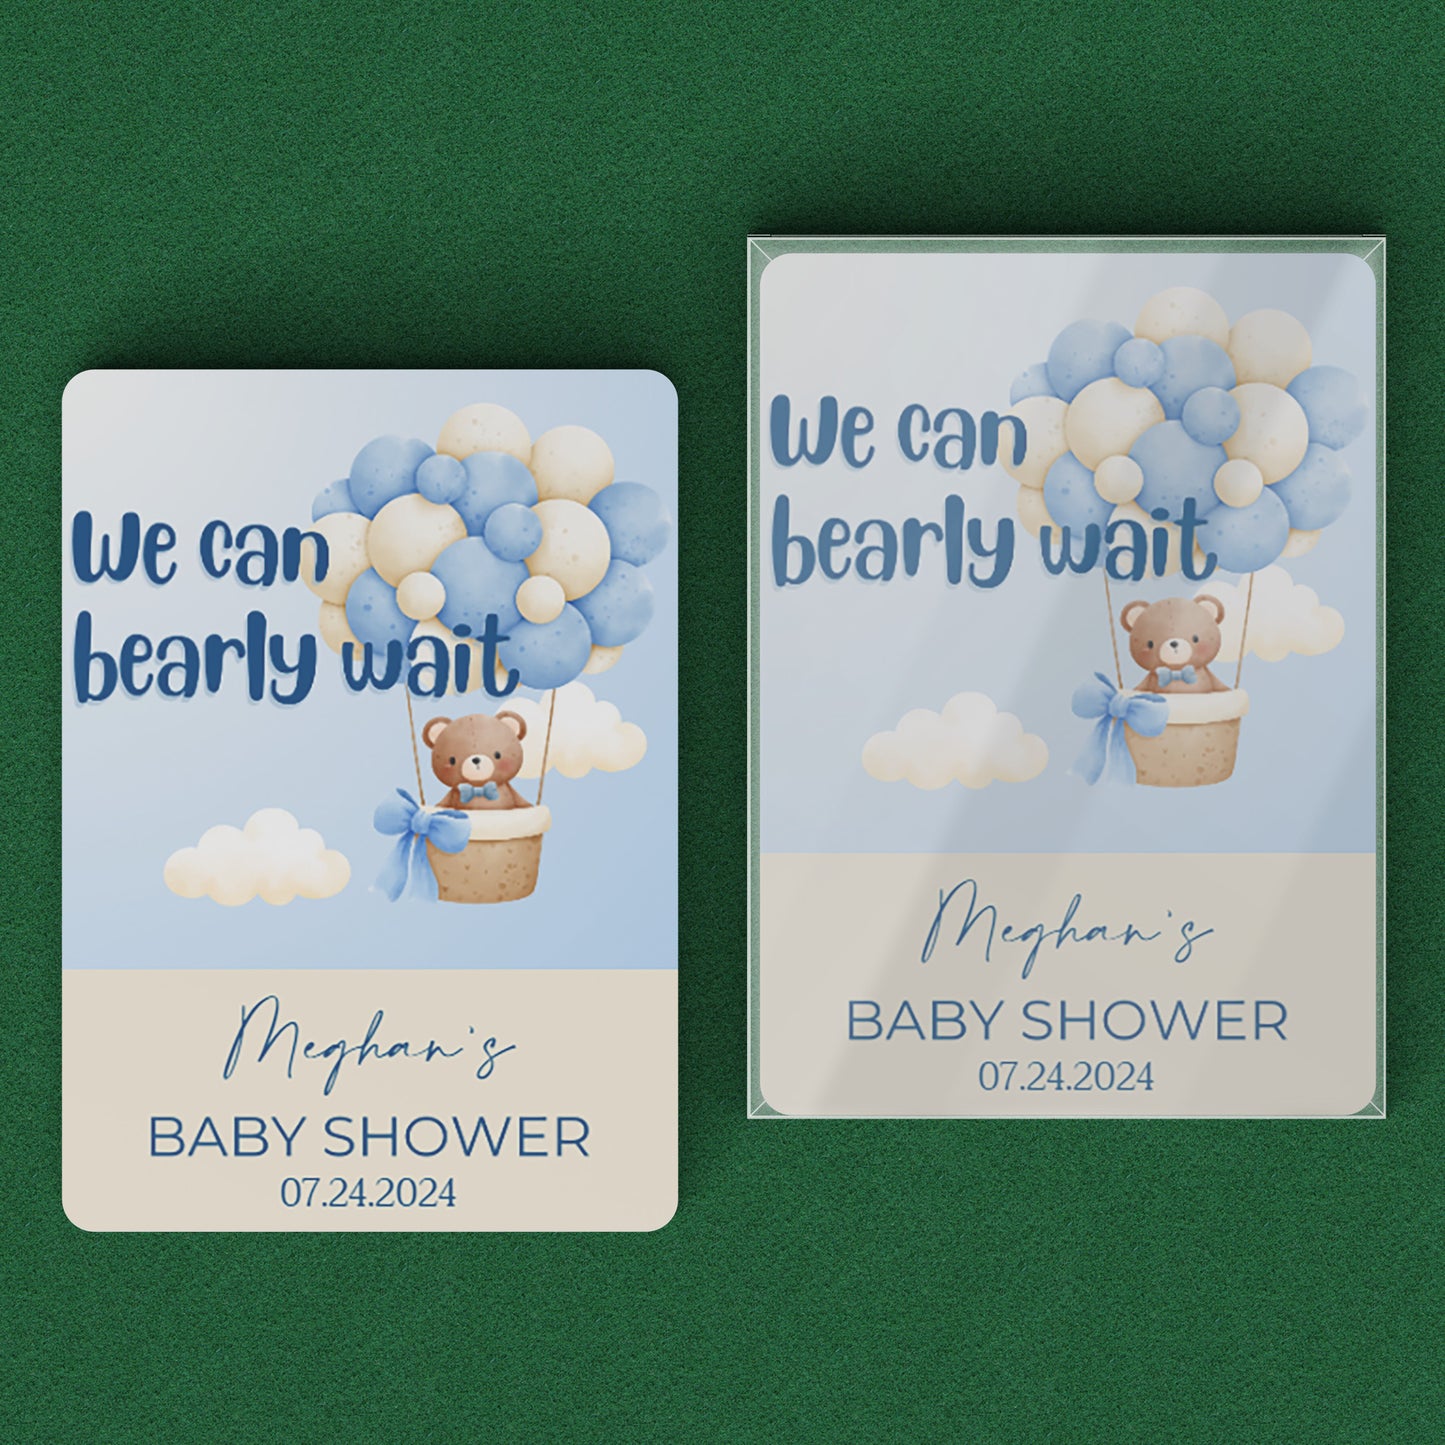 PLAYING CARDS BABY SHOWER DESIGN #2